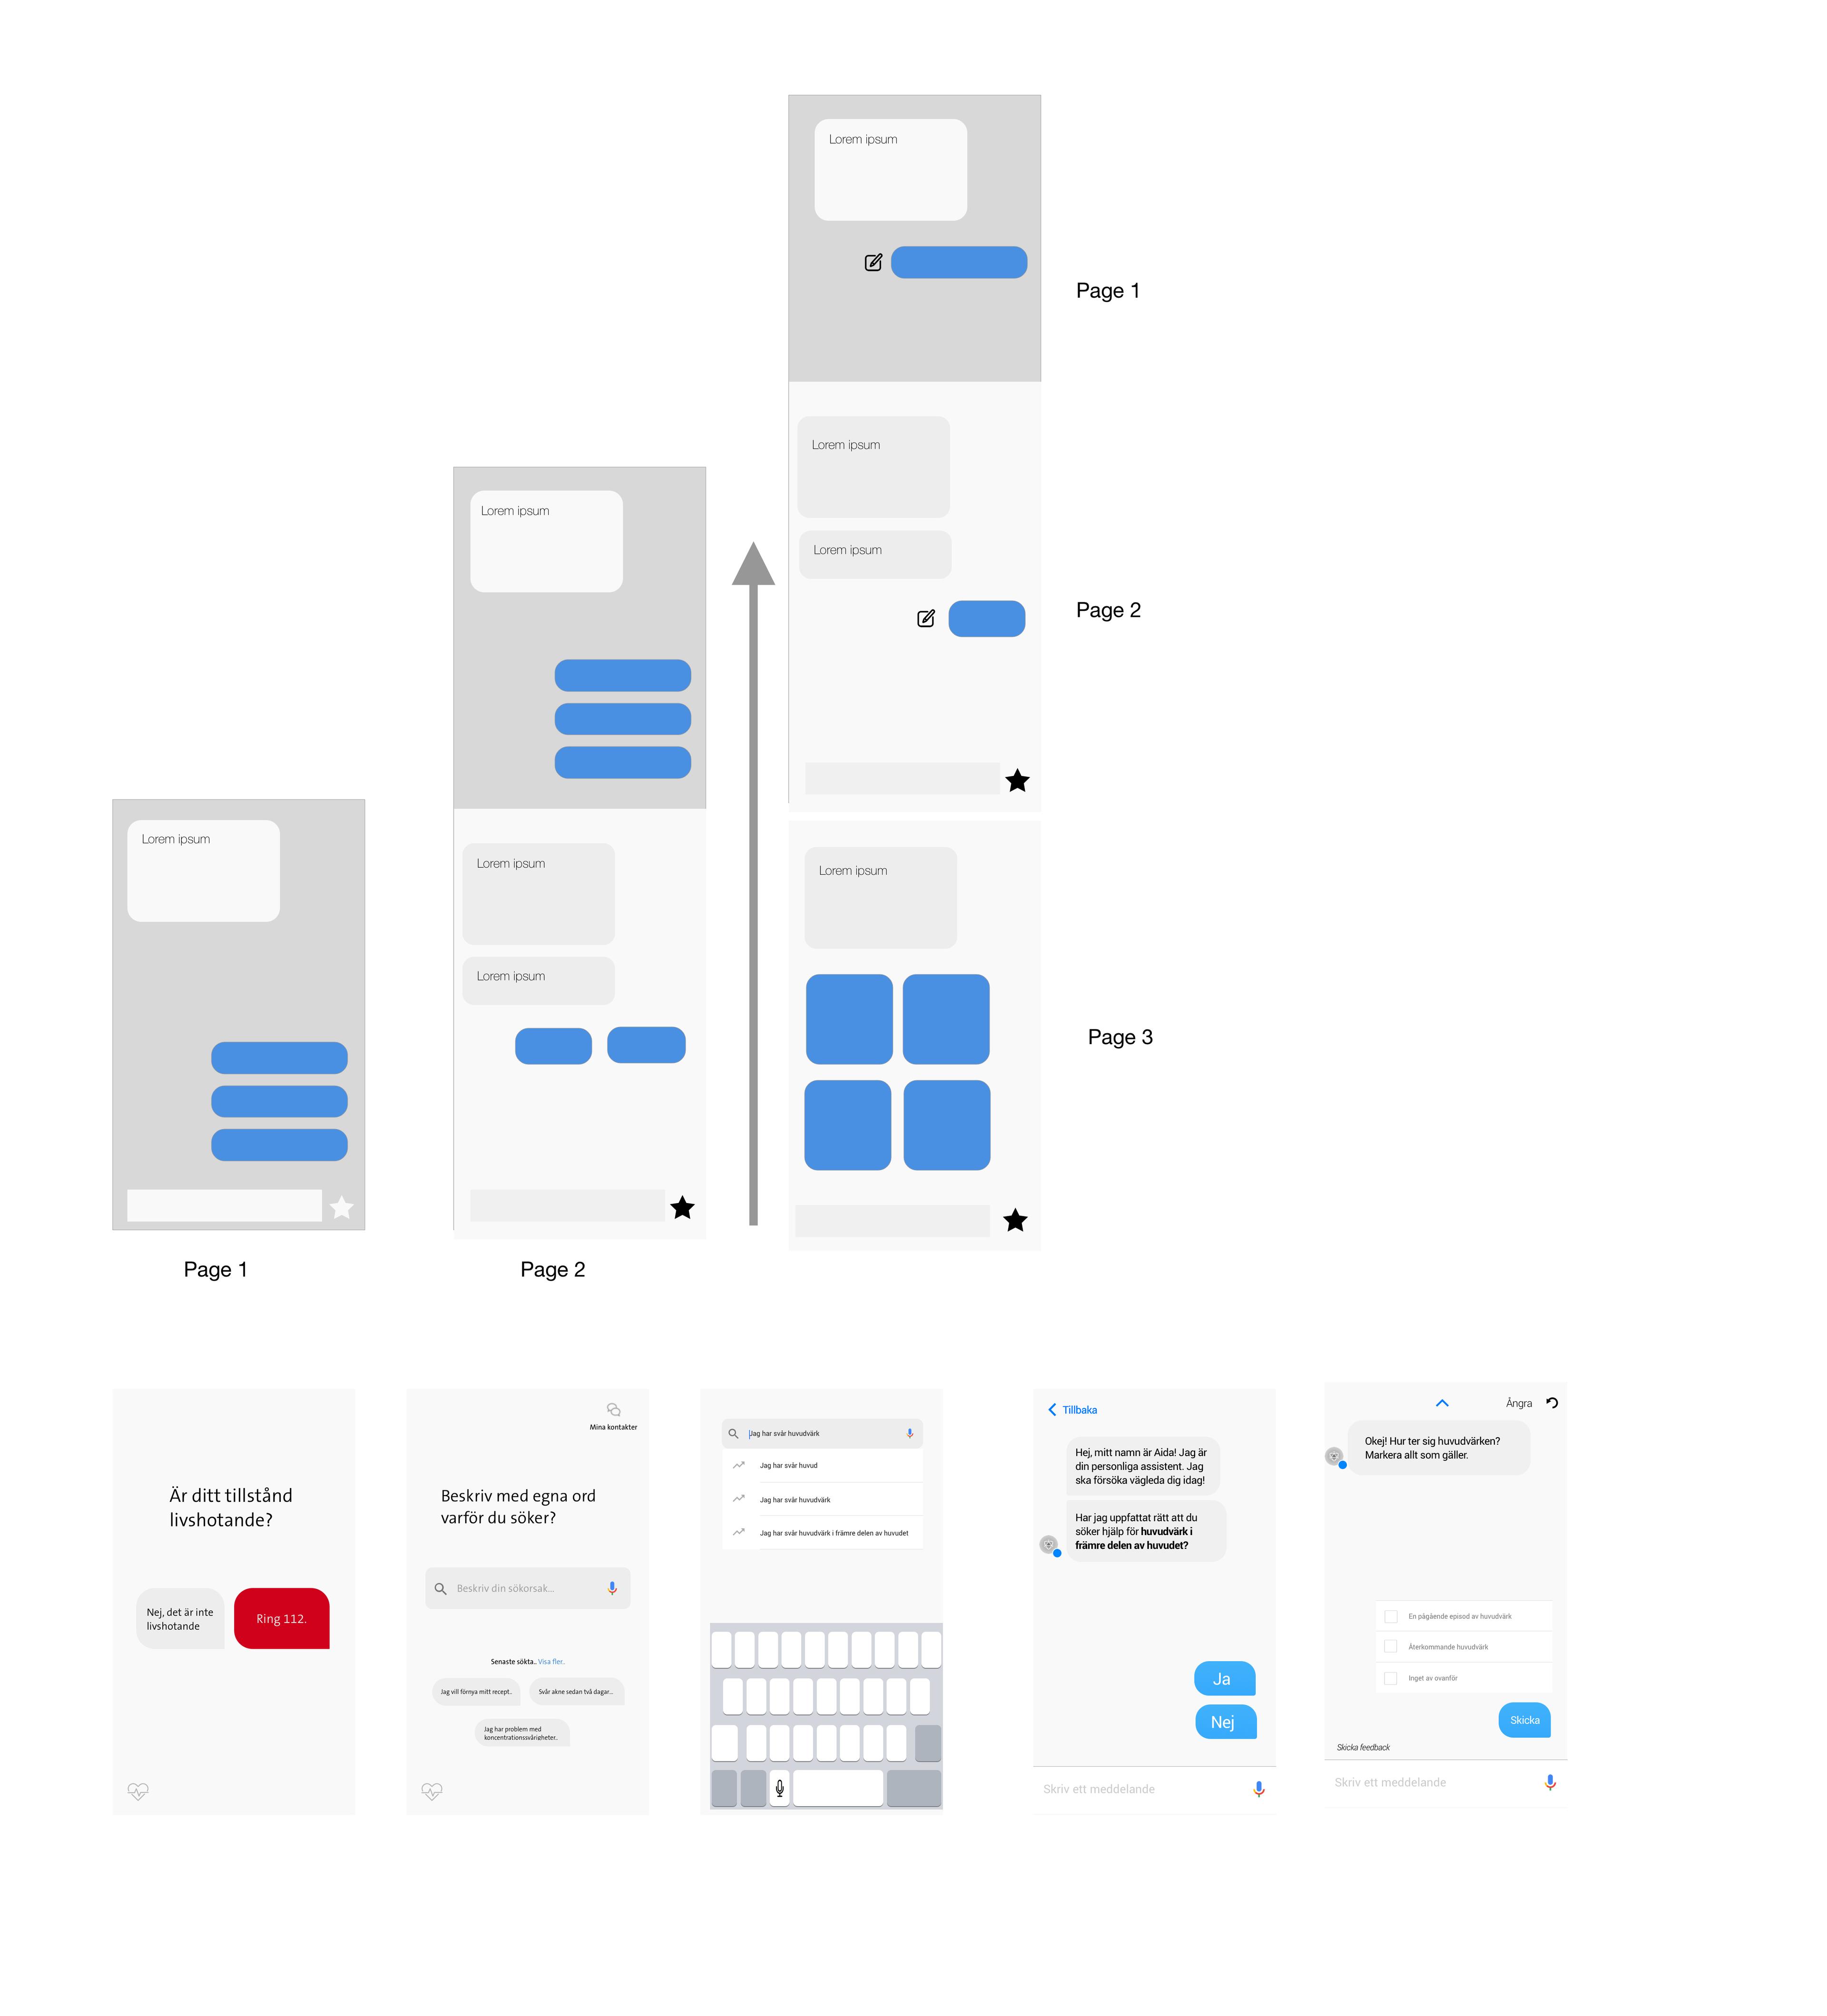 Illustration of a user interface design process with various sketches and layouts for a mobile application.